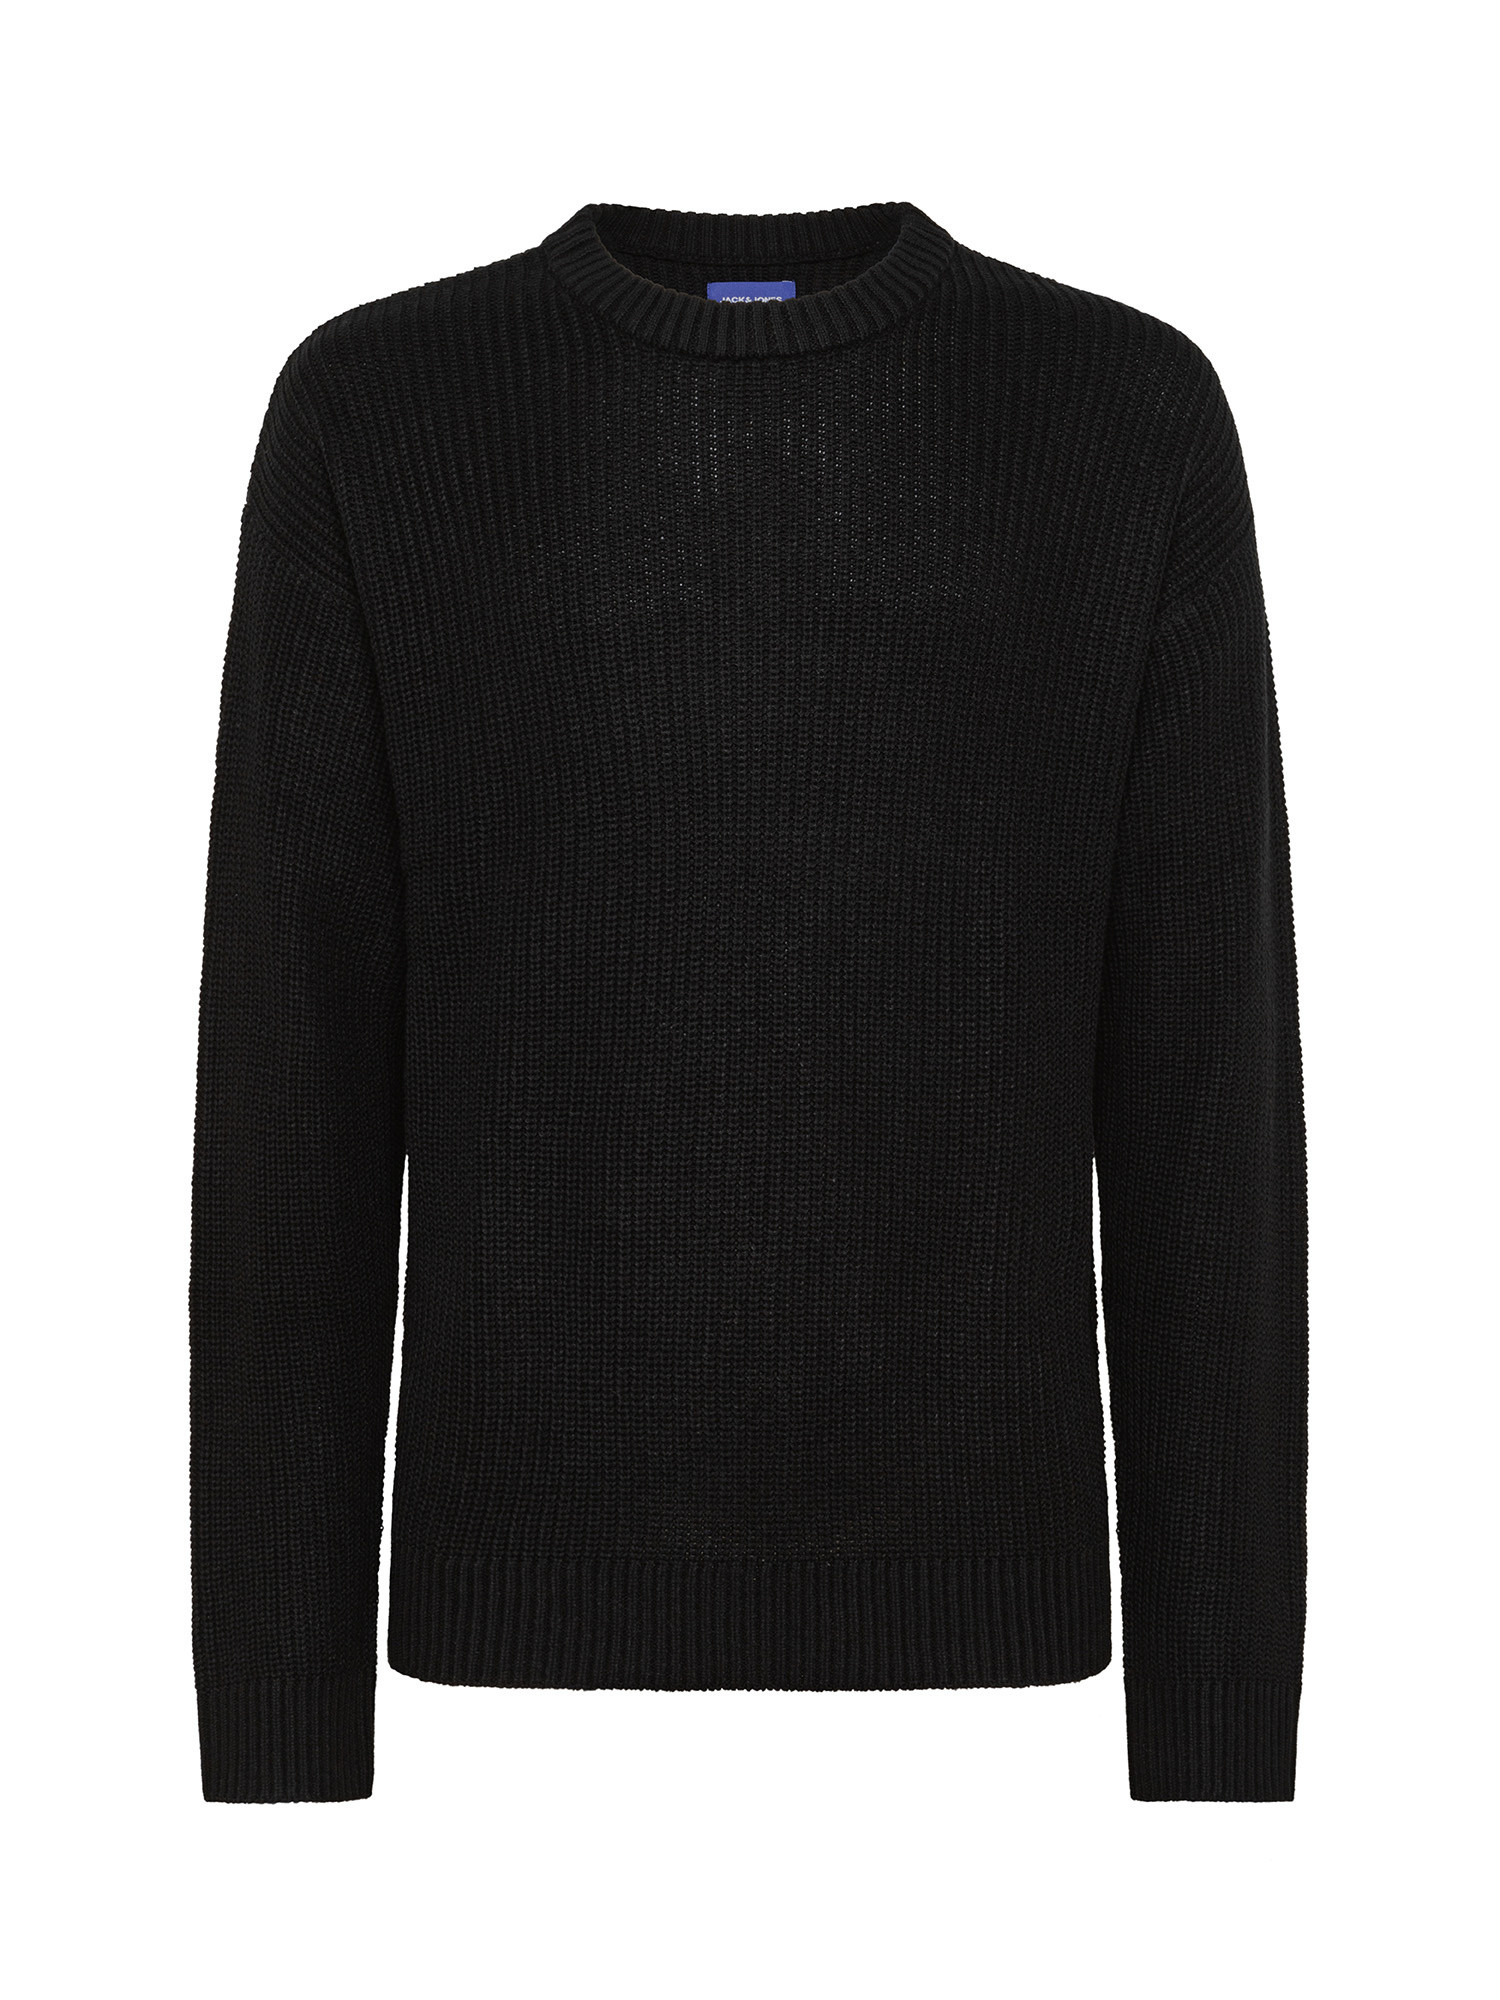 Pullover with long sleeves, Black, large image number 0